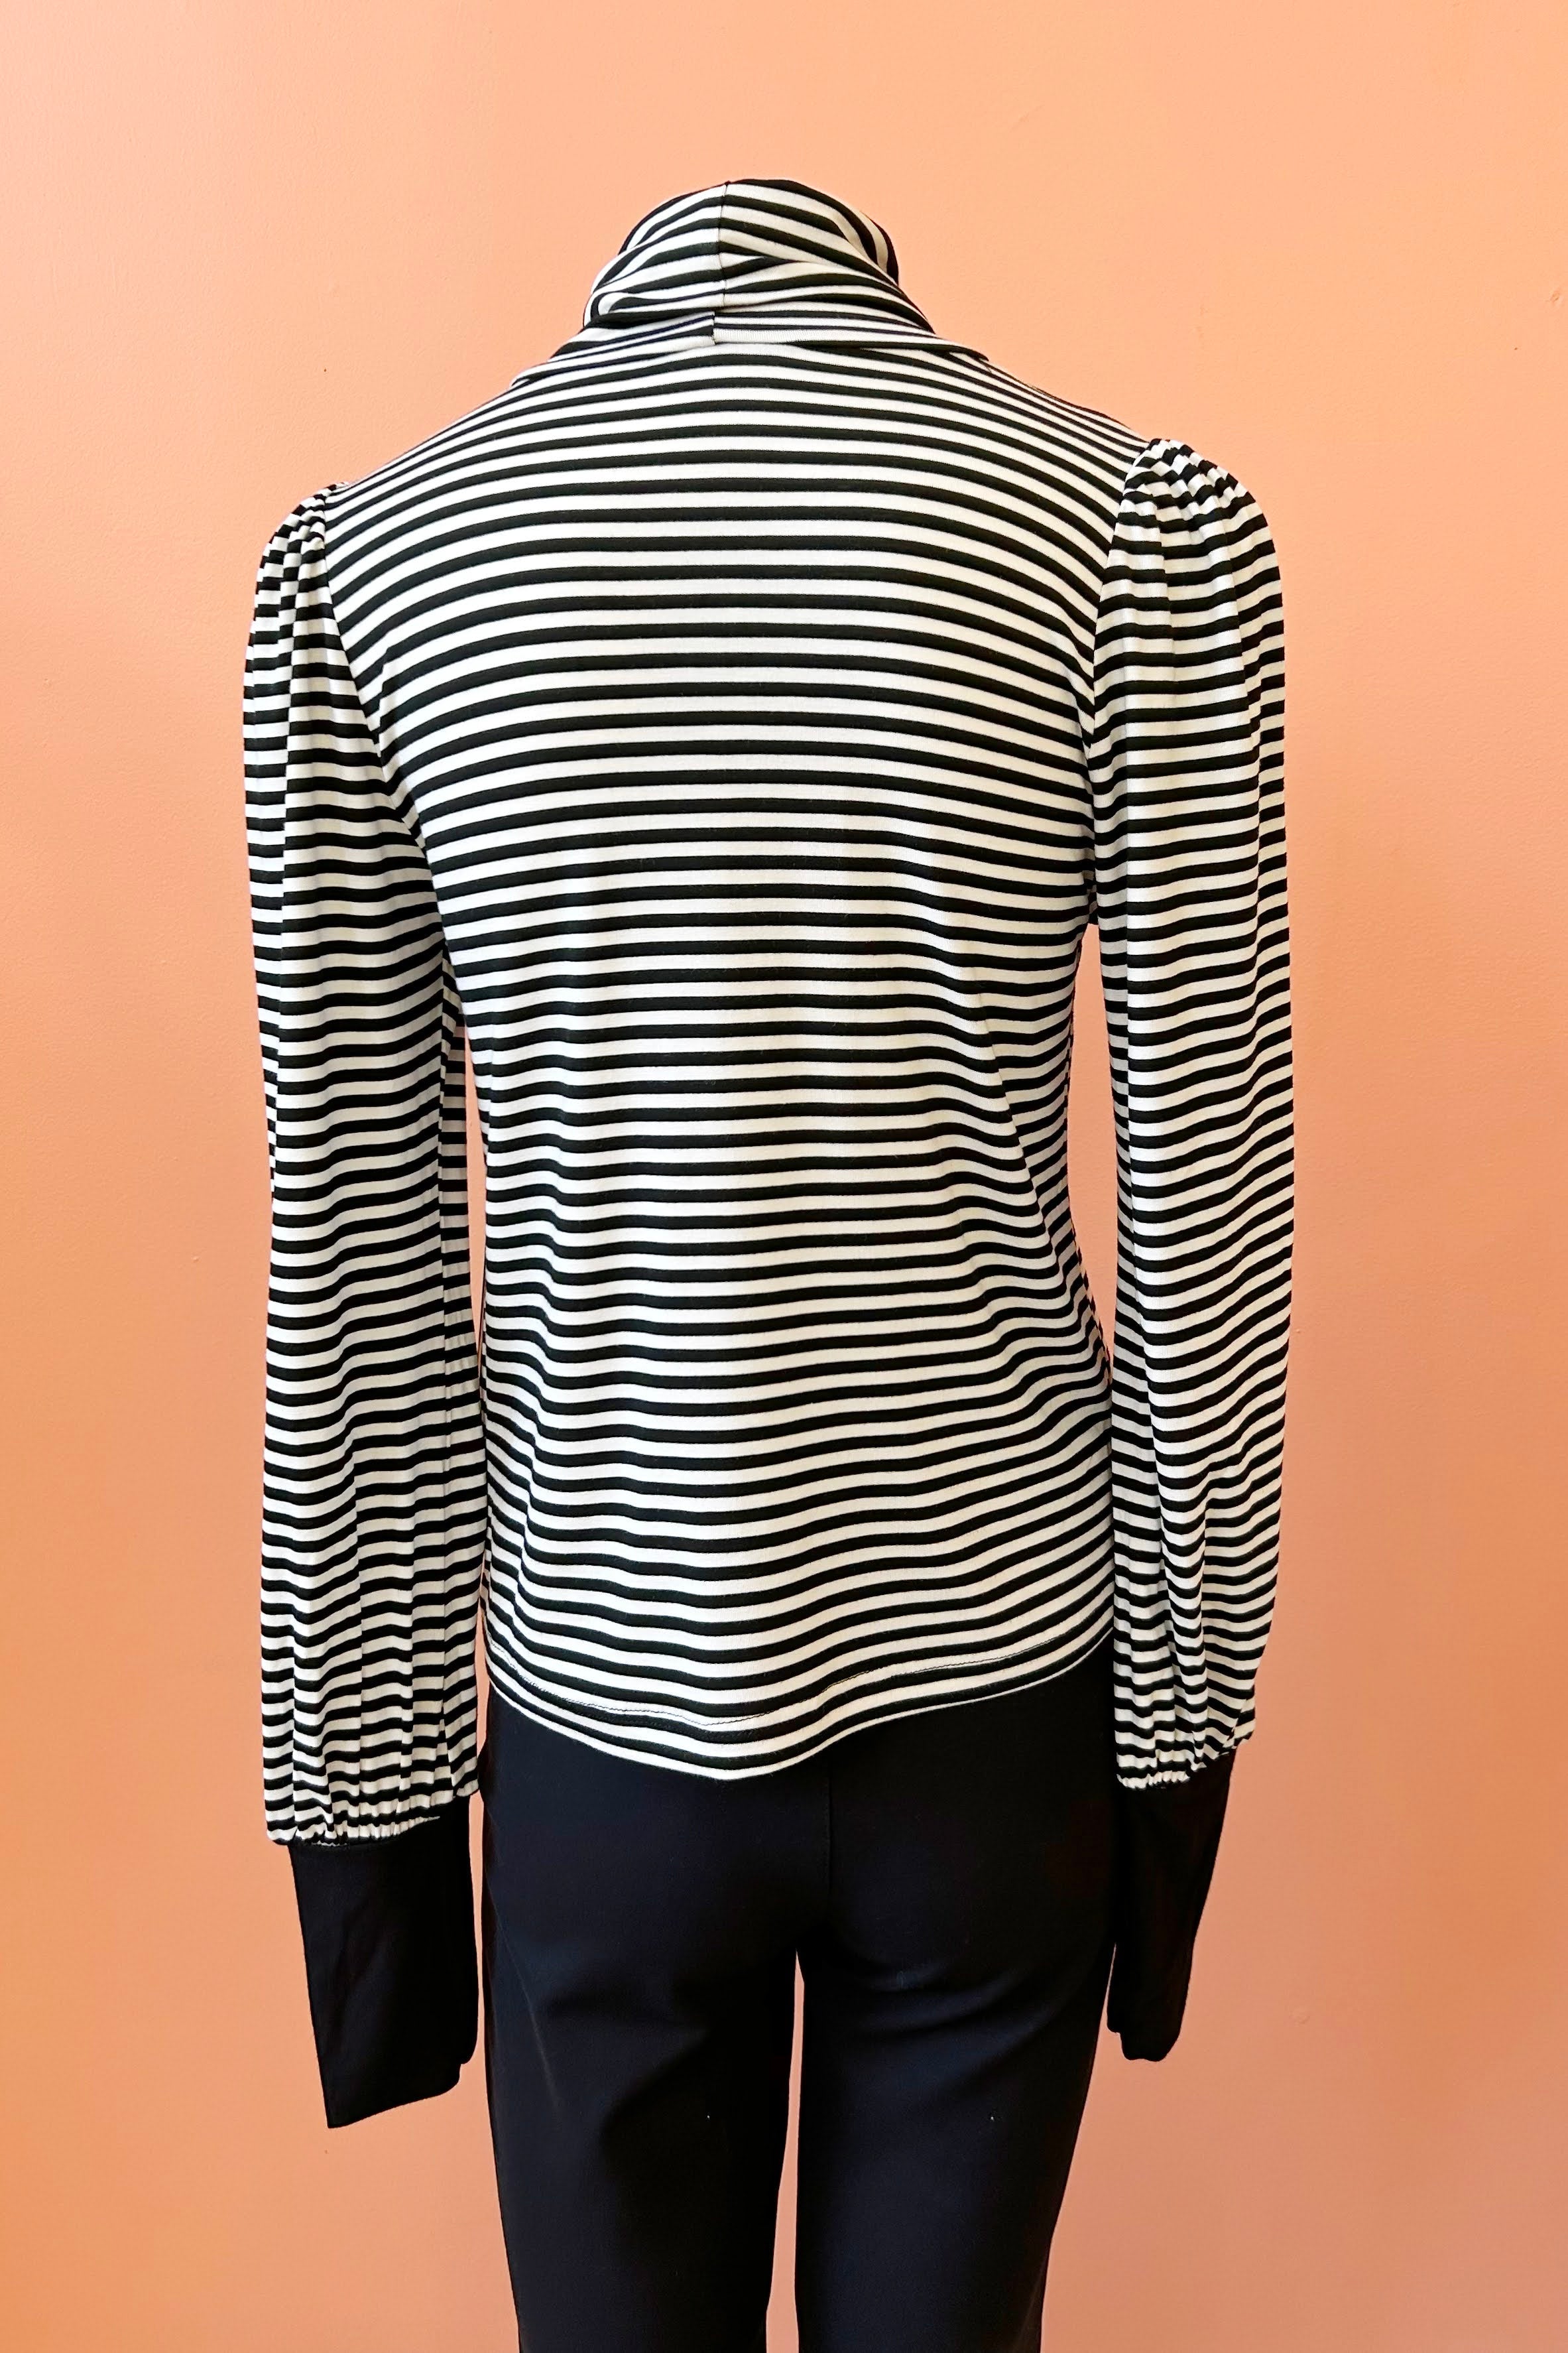 Turtleneck Top by Misstery, Black and White Stripe, high neck, puffed sleeves with gathered cuffs, sizes S to XL, made in Toronto 